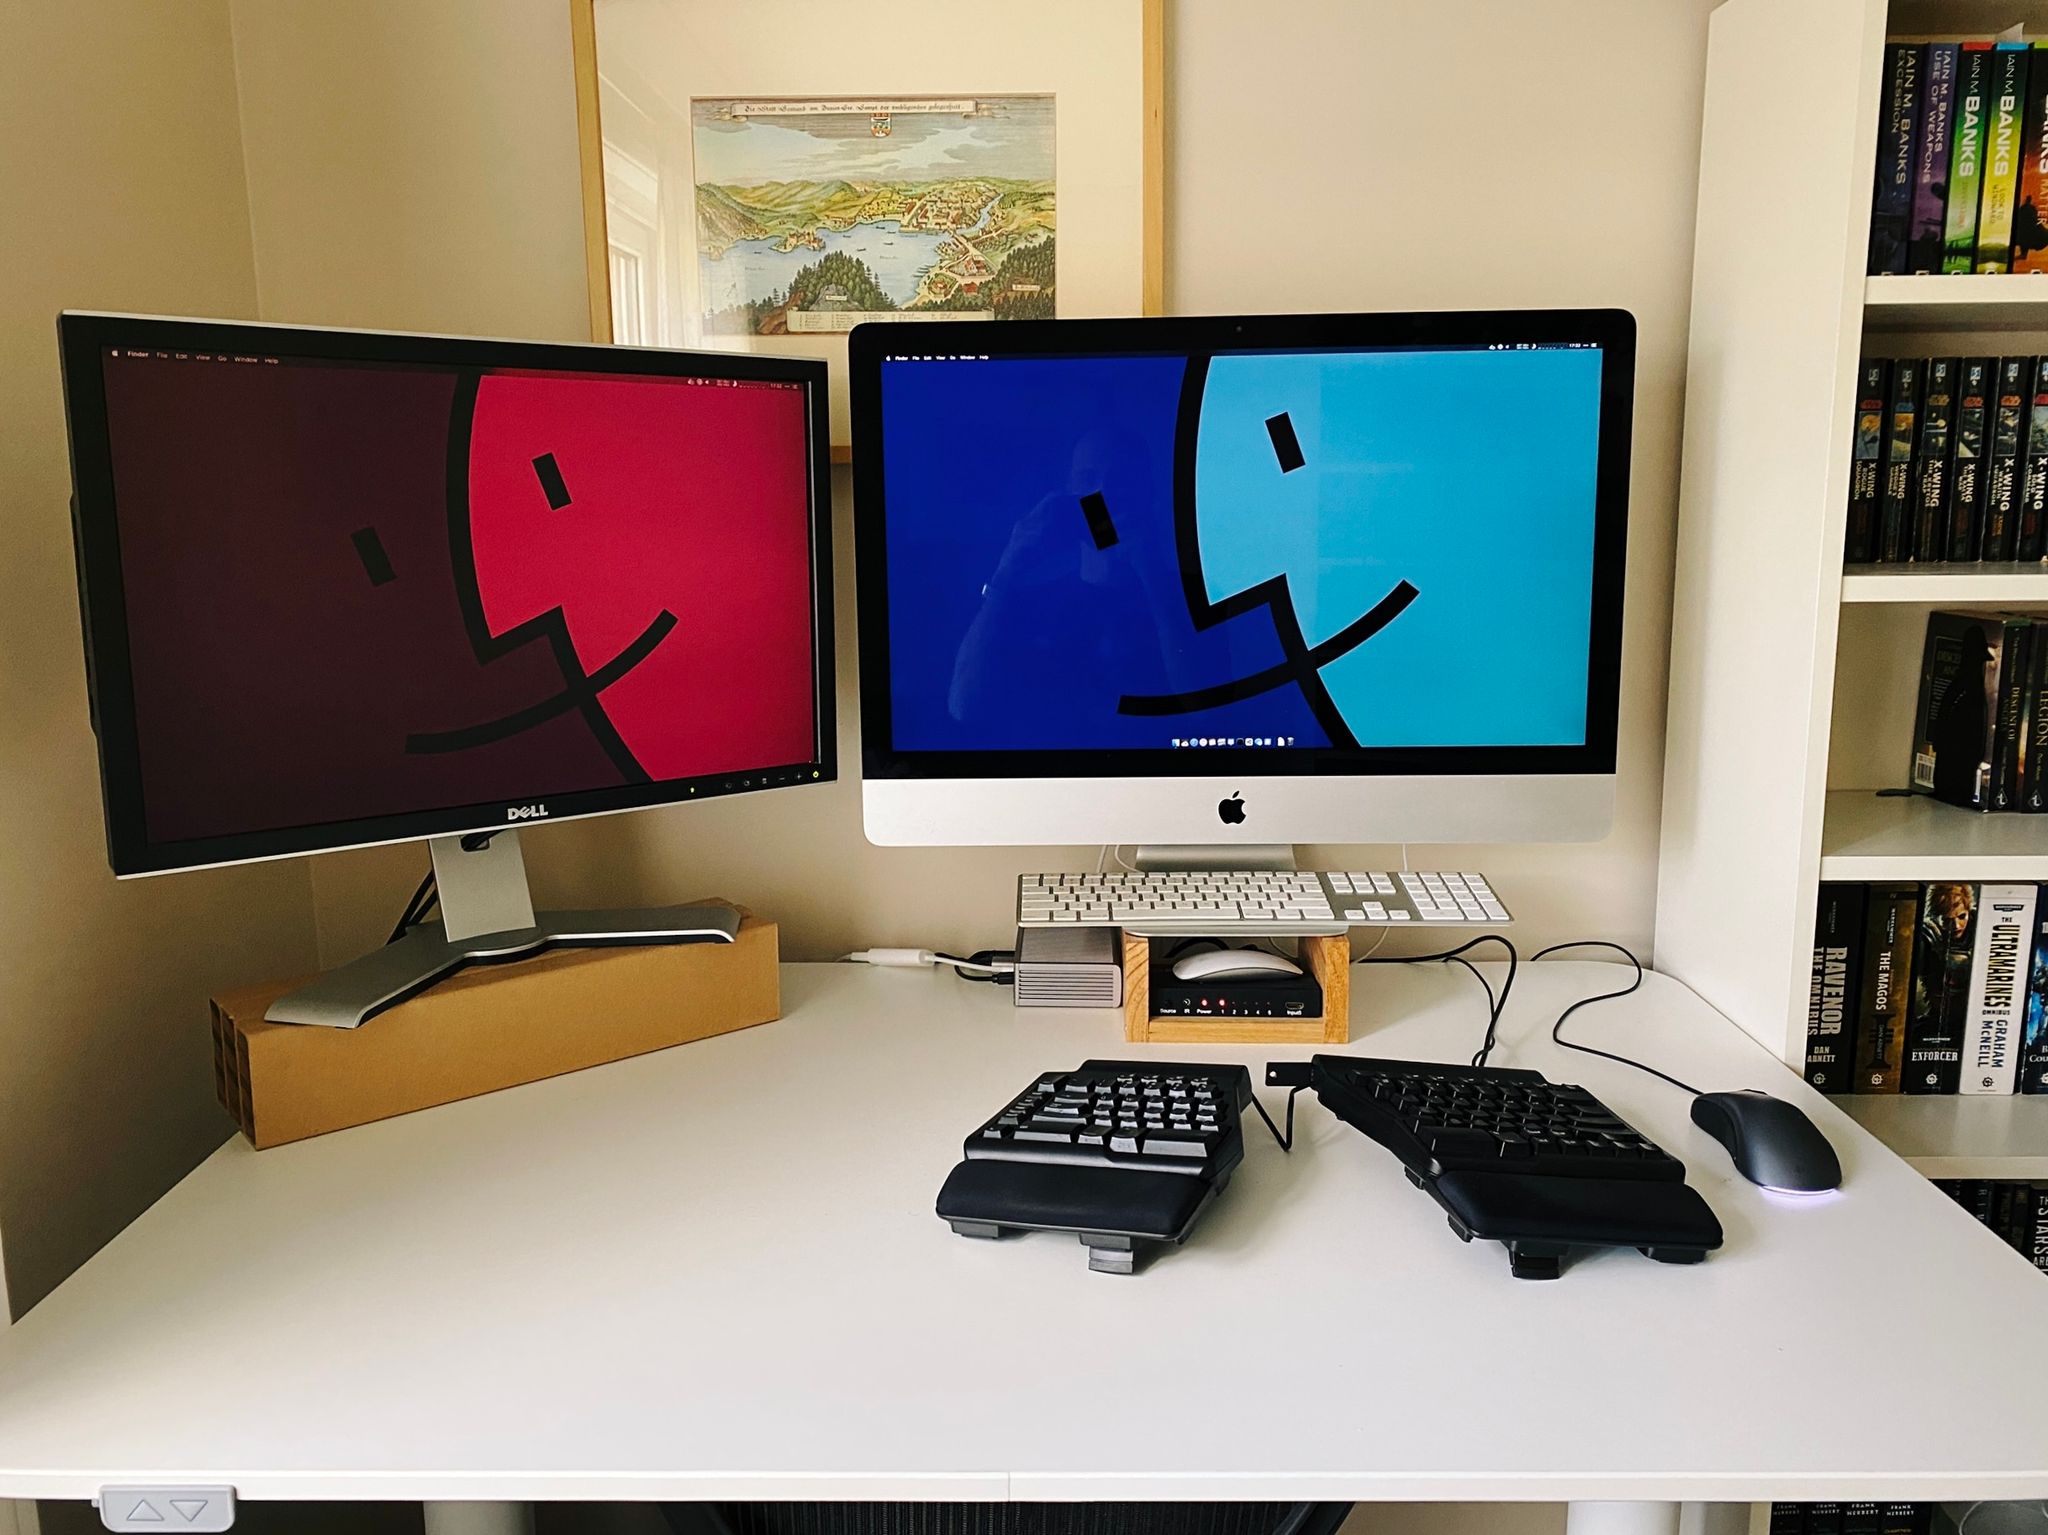 A photo of my old computer setup: a 27" 2013 iMac in the middle sitting atop a slightly-dodgy home-made wooden stand, with a 15 year-old 24" Dell to the left of it sitting on an even dodgier stand that consists of hard rectangular pieces of cardboard that were part of the packaging for something or other. There's a CalDigit dock next to the iMac with a ton of cables coming out of it.